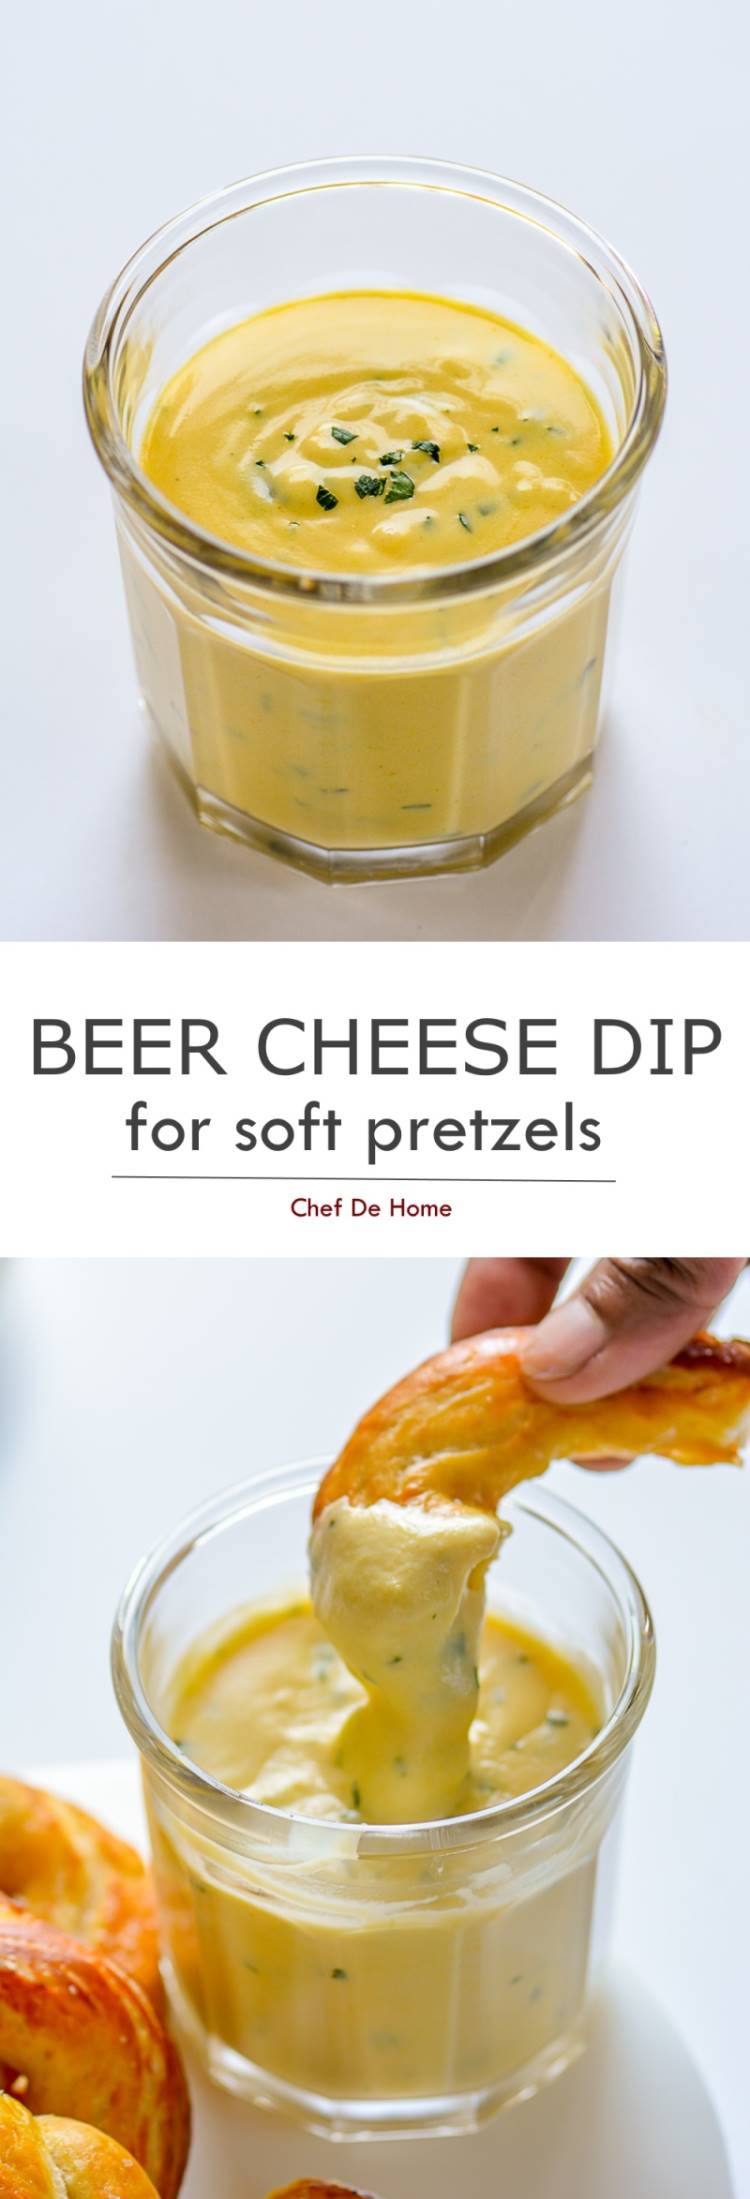 Spicy Beer Cheese Dipping Sauce to serve with soft homemade pretzels | chefdehome.com